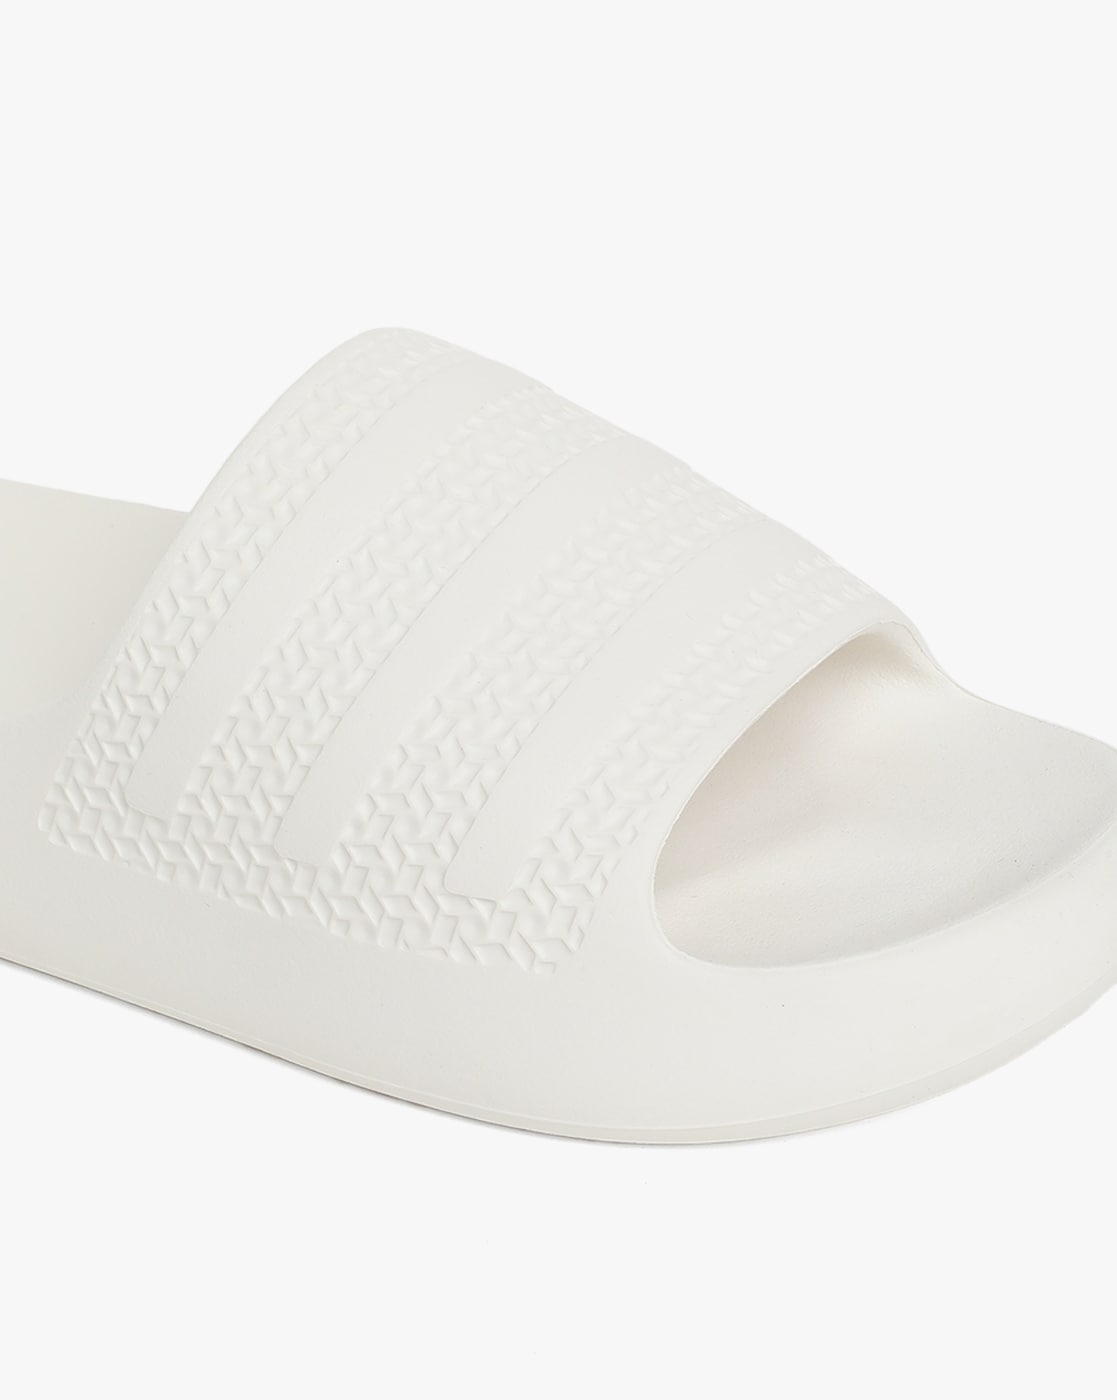 Experience 212+ adidas slippers for women best